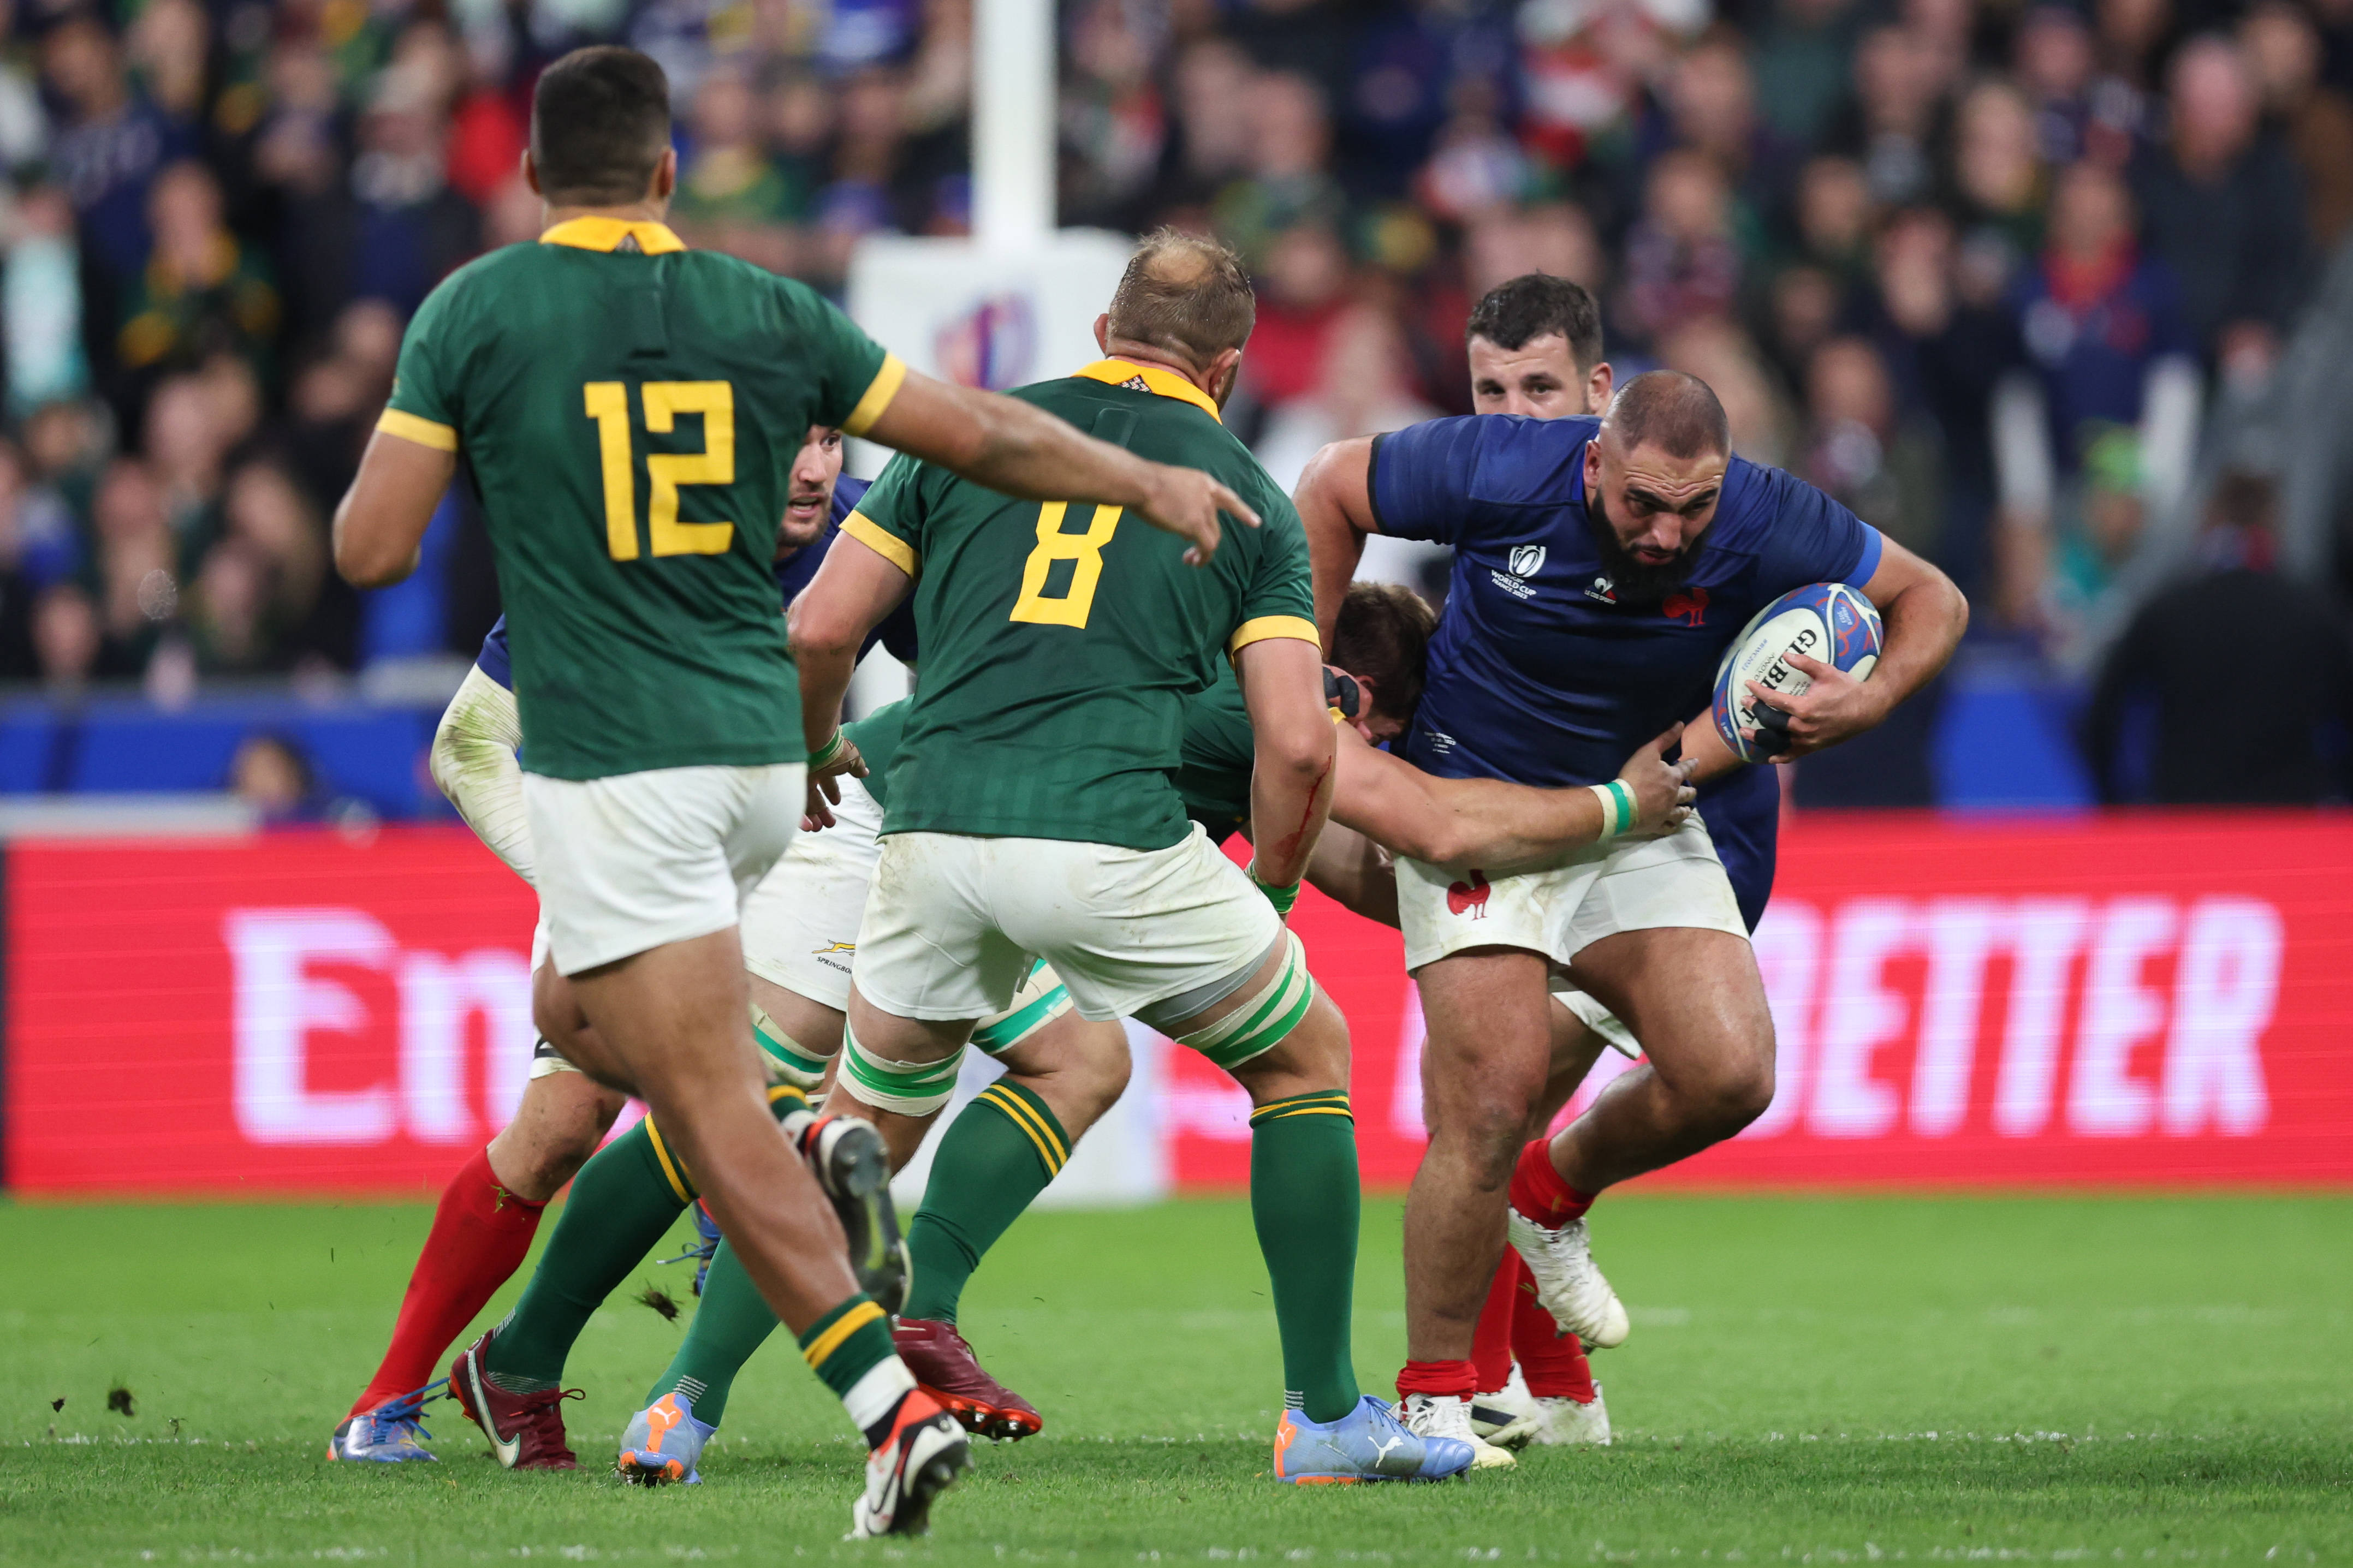 rugby france england live stream